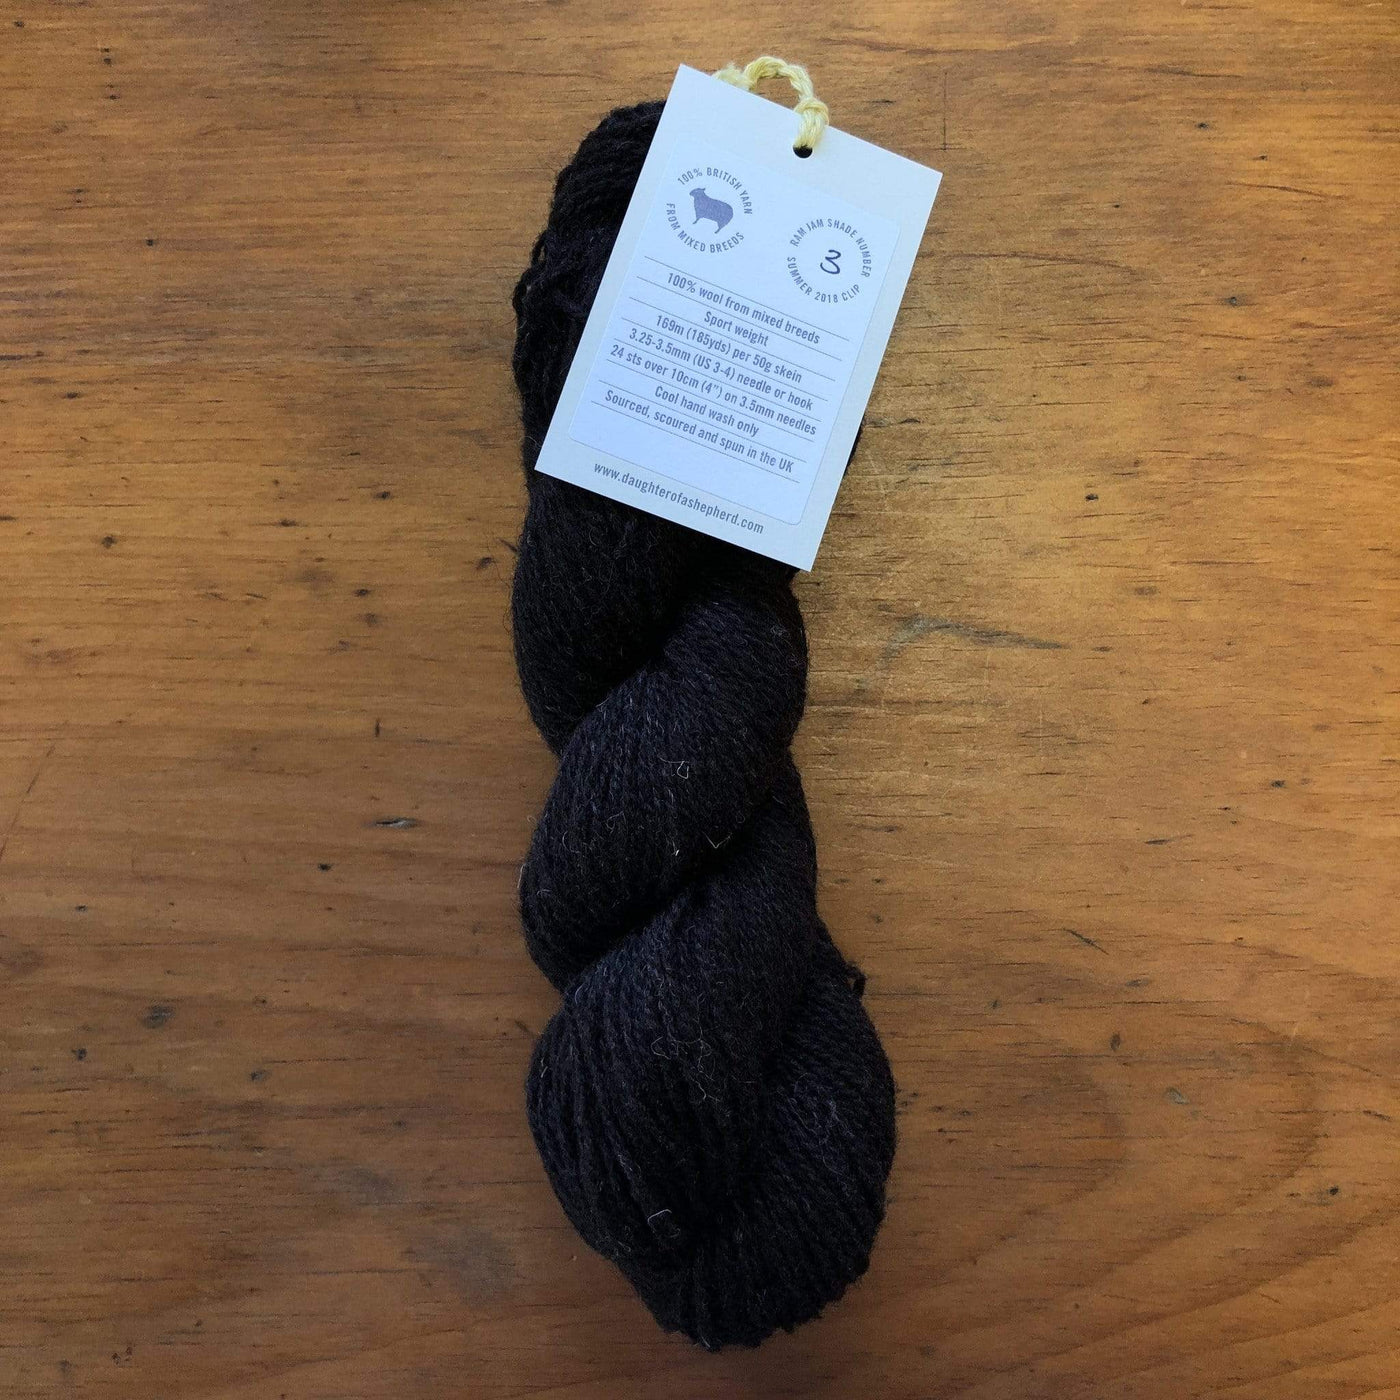 The Woolly Thistle Ram Jam Sport 2ply yarn from Daughter of a Shepherd in  Natural Black